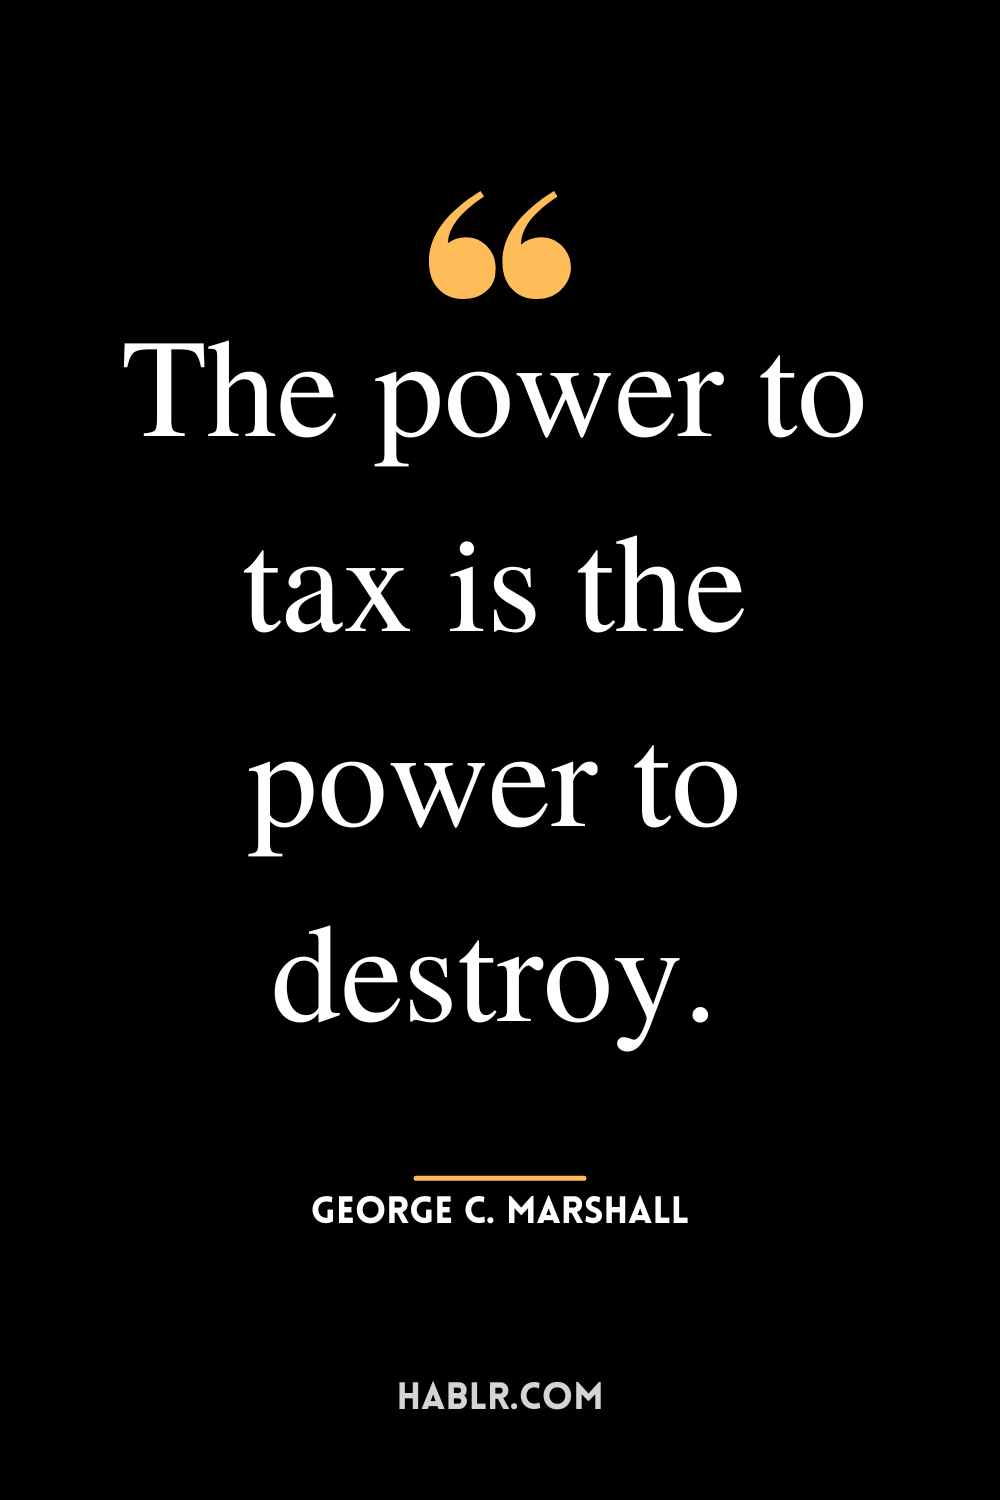 “The power to tax is the power to destroy.”-George C. Marshall